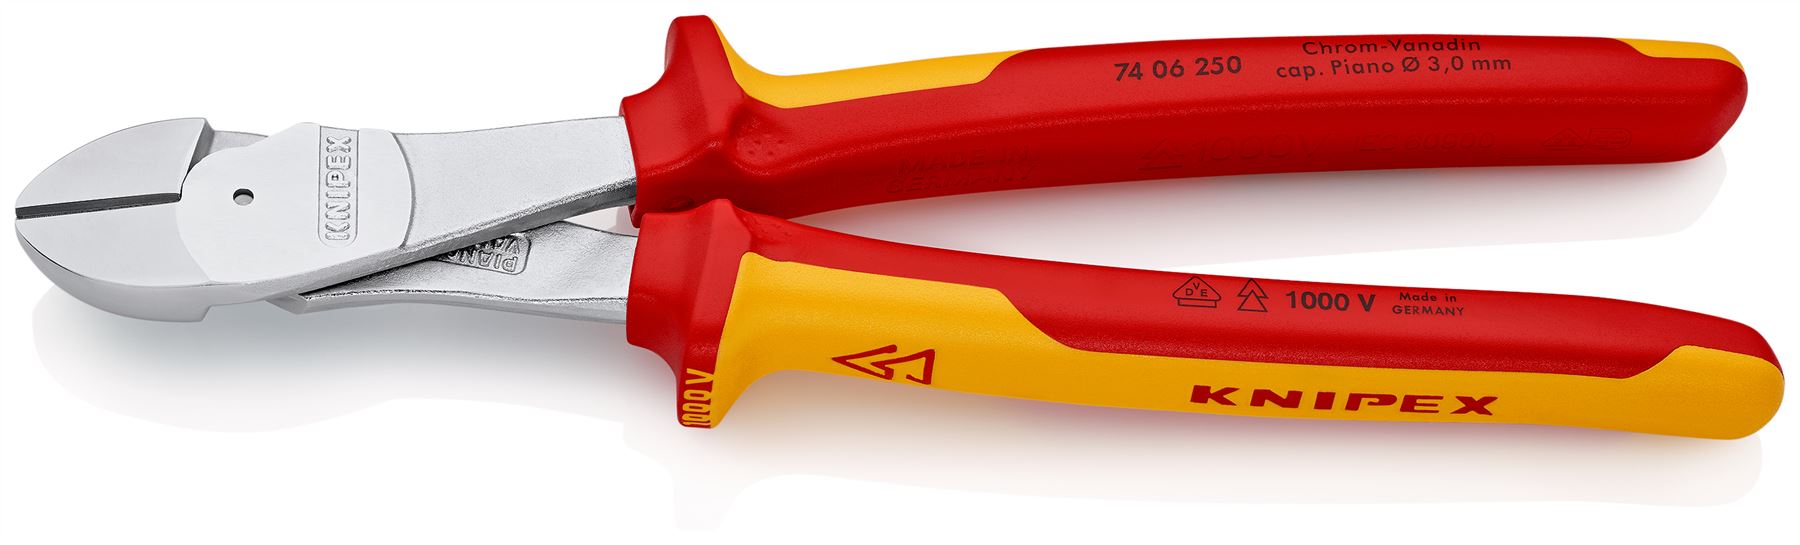 KNIPEX Diagonal Cutting Pliers High Leverage Side Cutters 250mm VDE Multi Component Grips 74 06 250